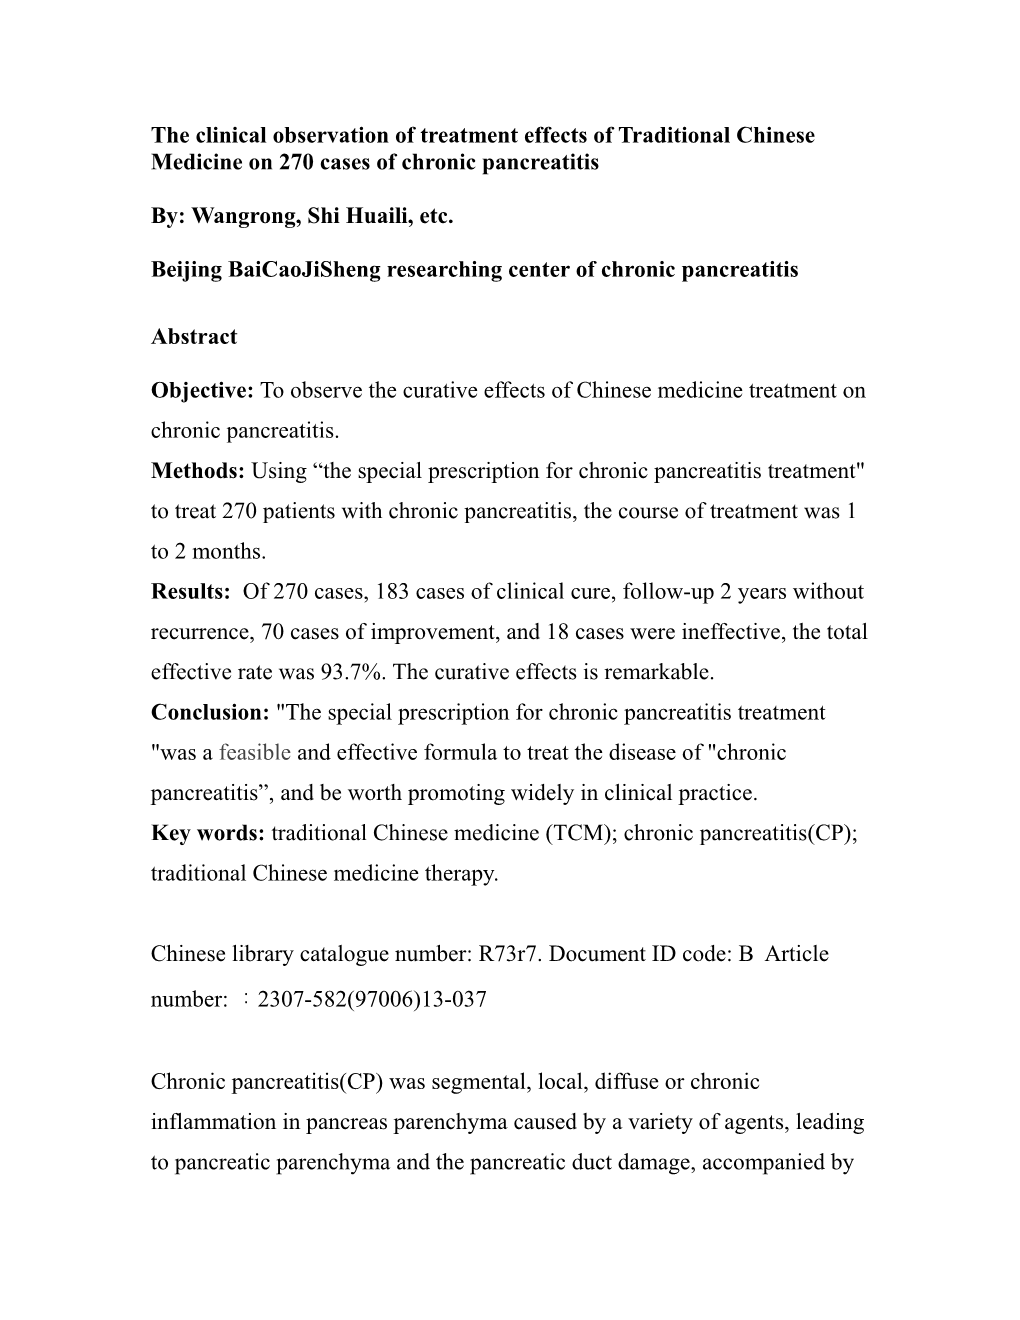 The Clinical Observation of Treatment Effects of Traditional Chinese Medicine on 270 Cases